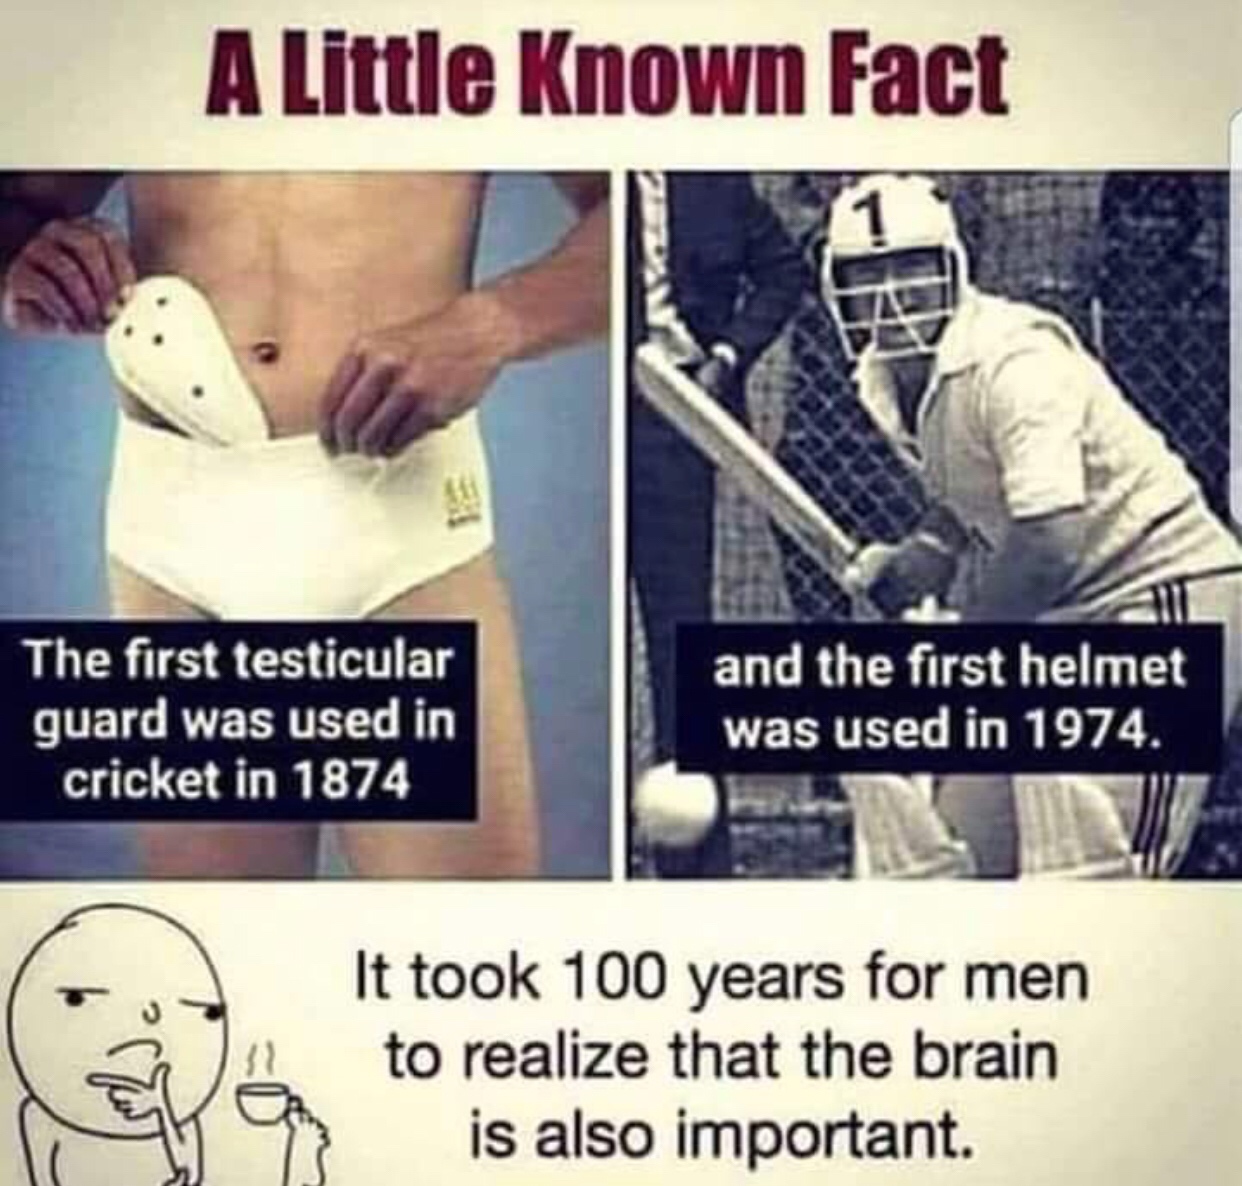 Humour - A Little Known Fact The first testicular guard was used in cricket in 1874 and the first helmet was used in 1974. It took 100 years for men to realize that the brain is also important.